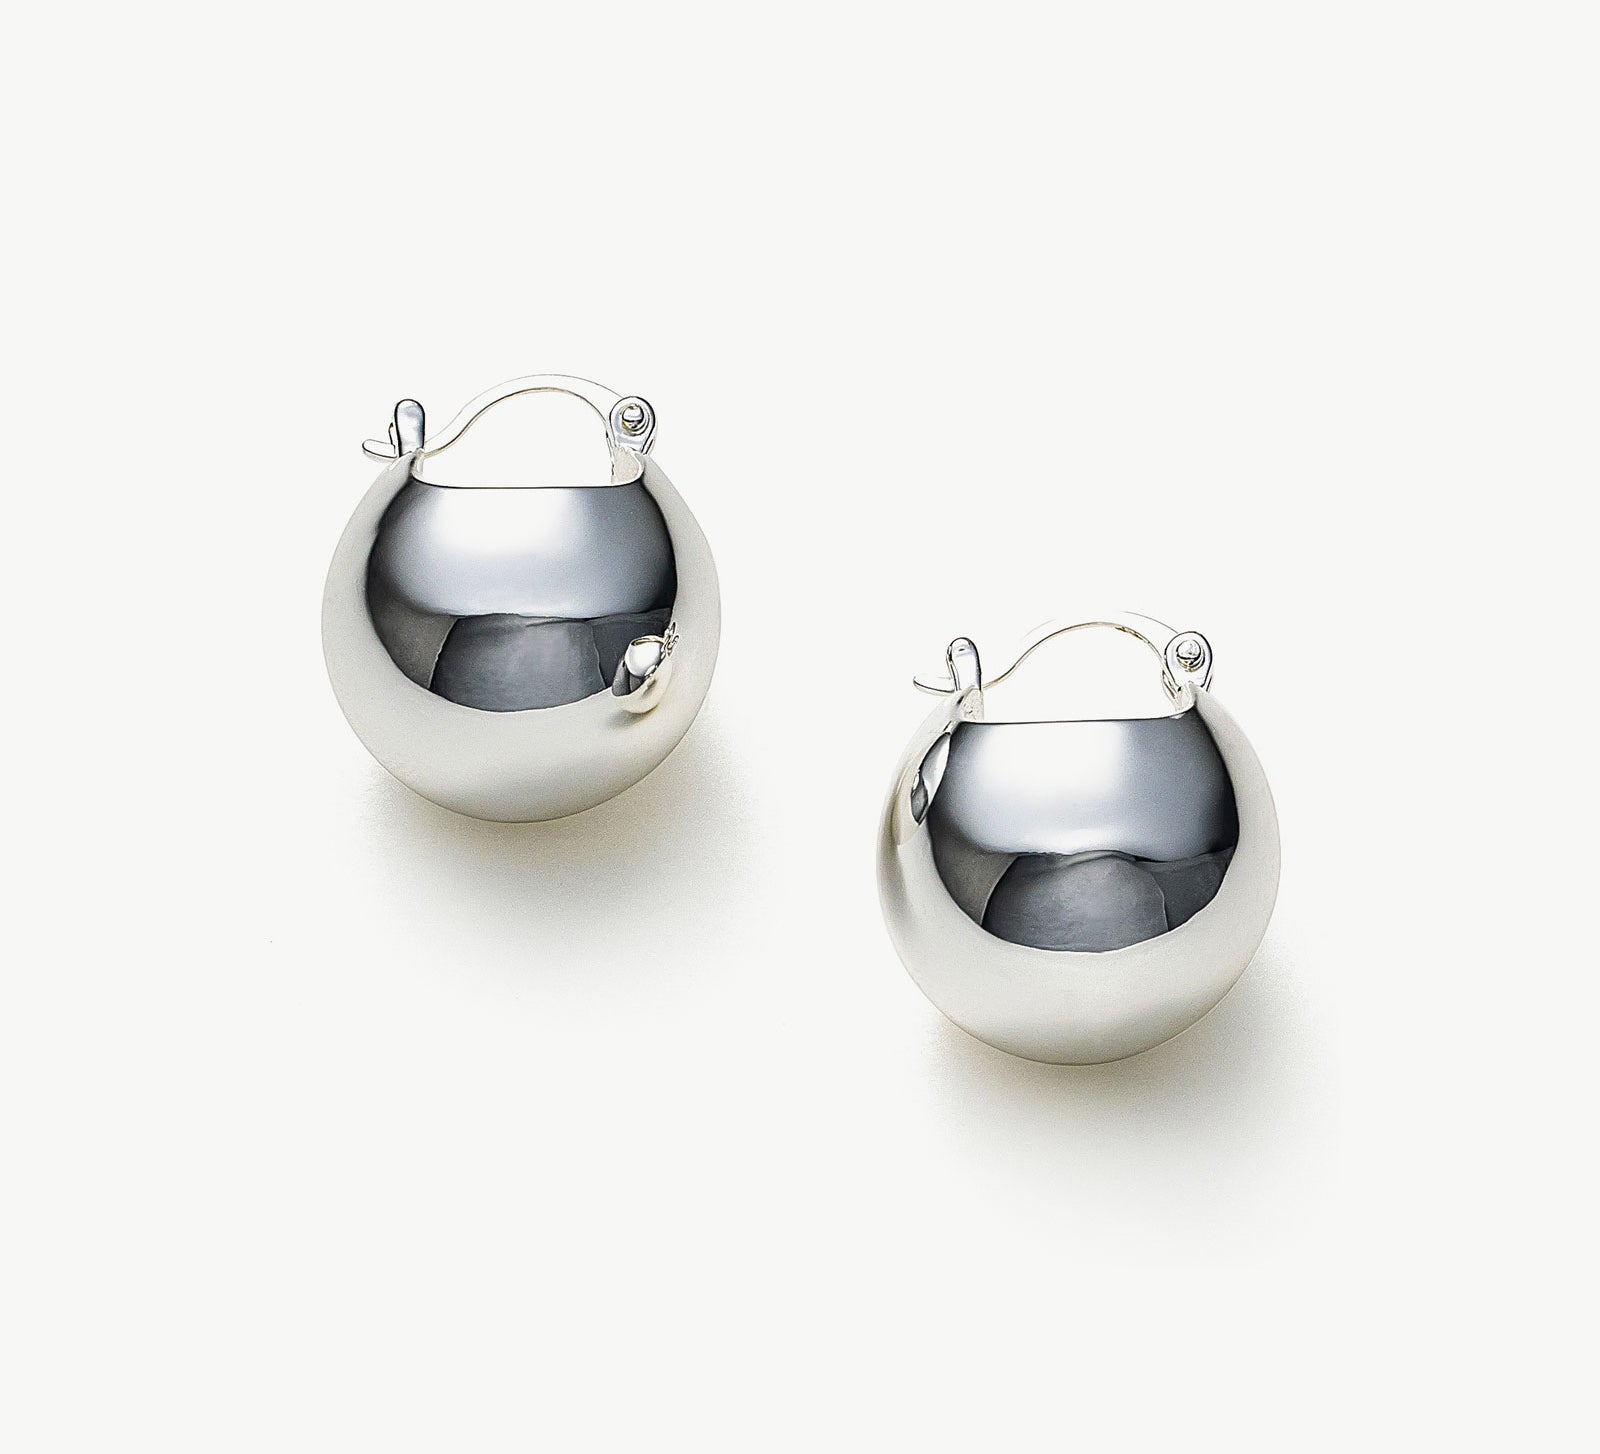 Semiphere Hoop Earrings making sculptural statements with their semiphere design, these earrings add a touch of refined charm to your overall style